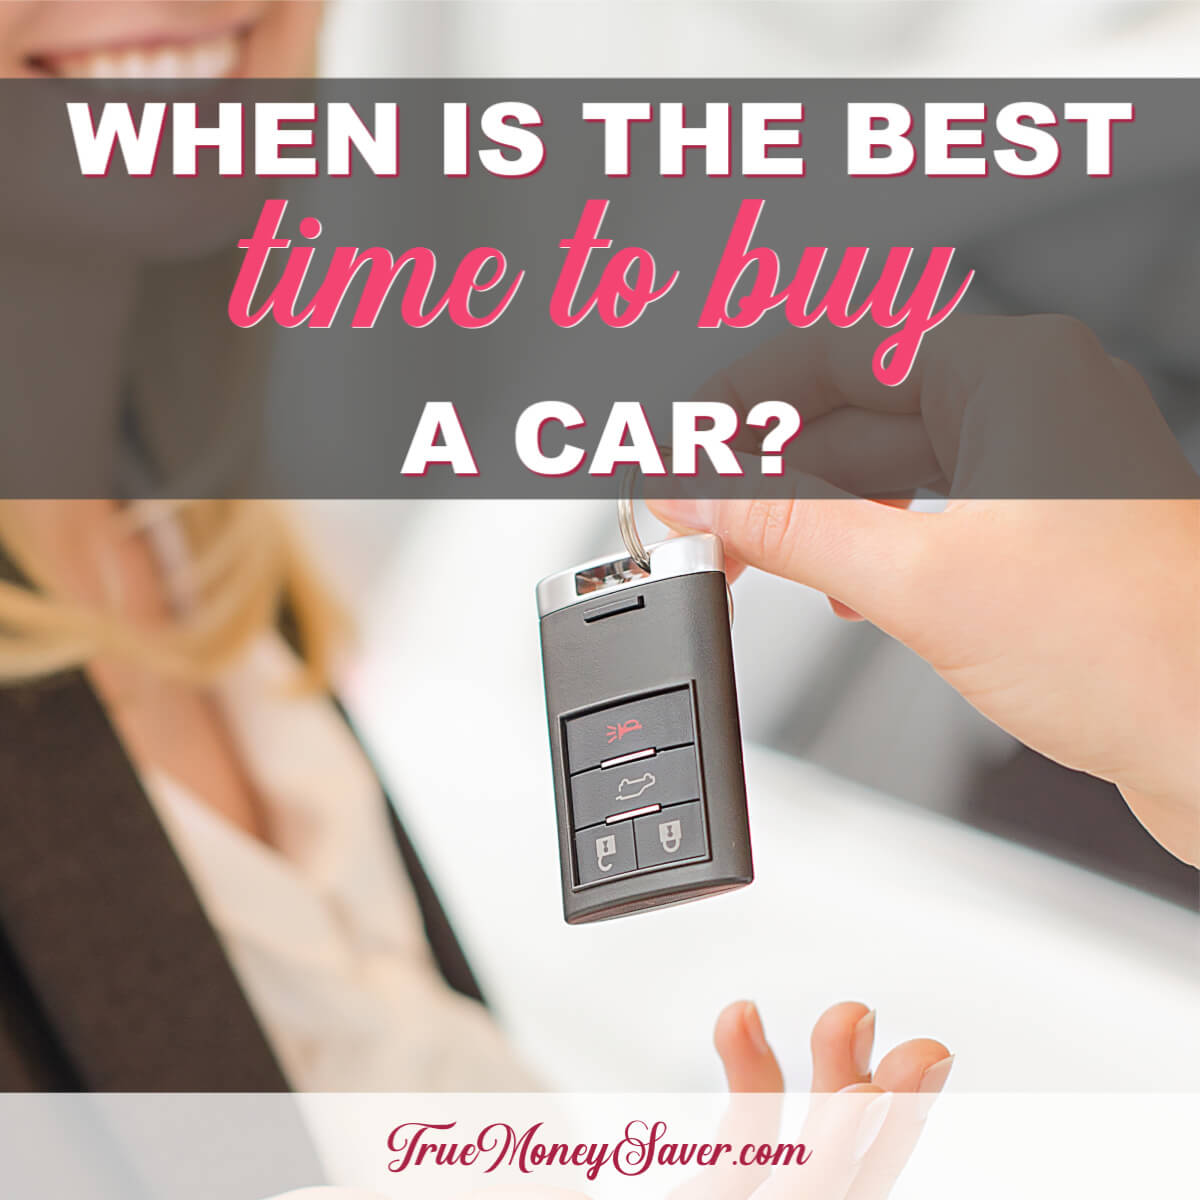 When Is The Best Time To Buy A Car?